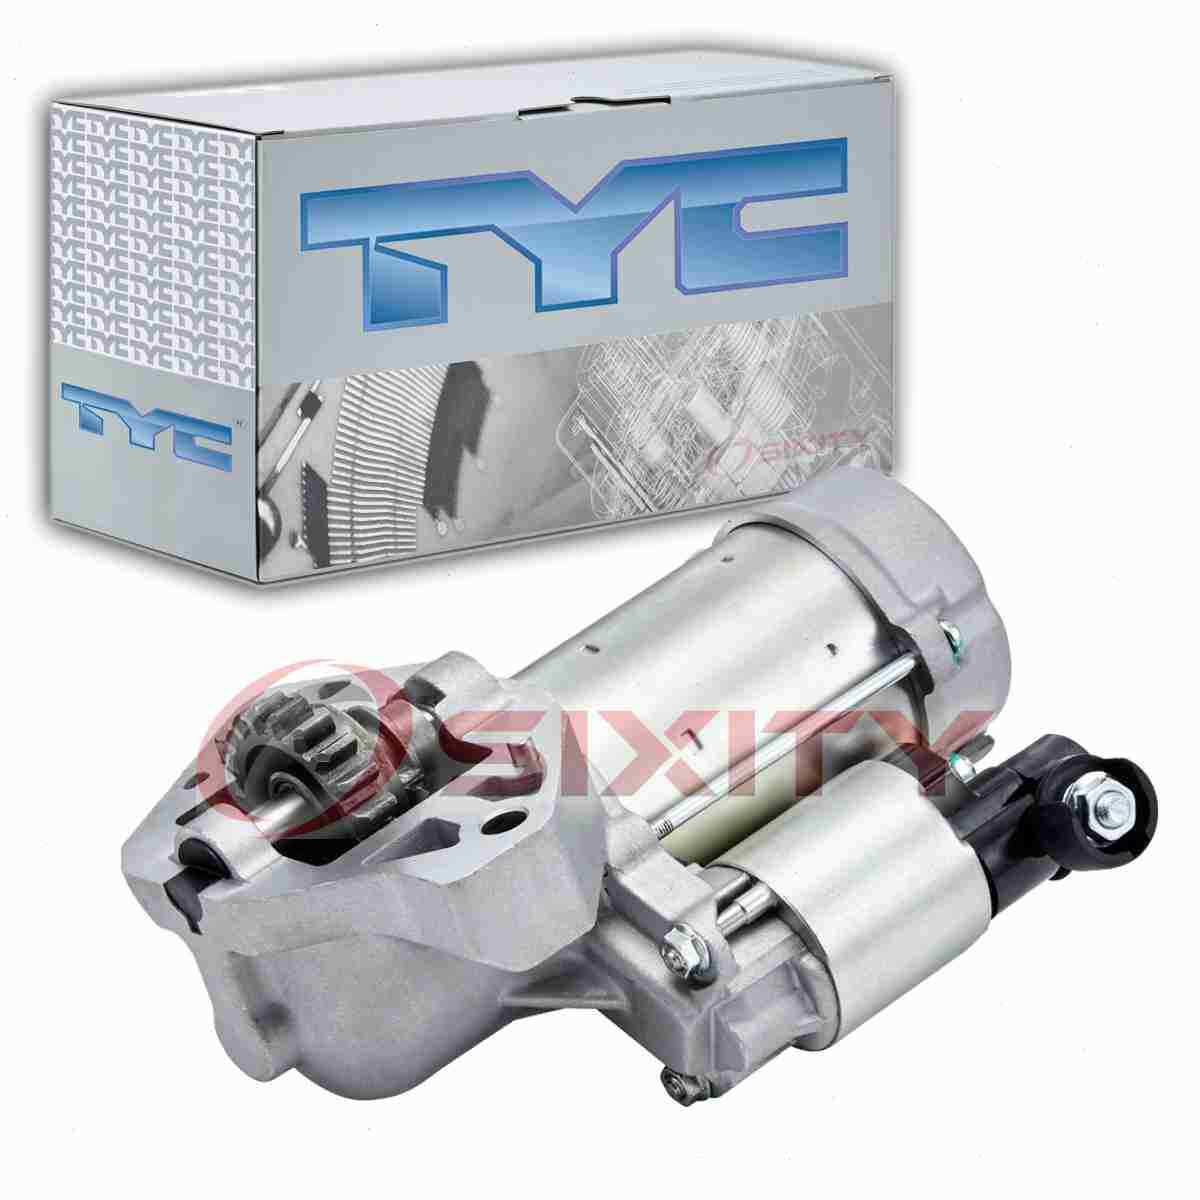 TYC Starter Motor for 2009-2011 Acura TL 3.5L 3.7L V6 Electrical Charging al